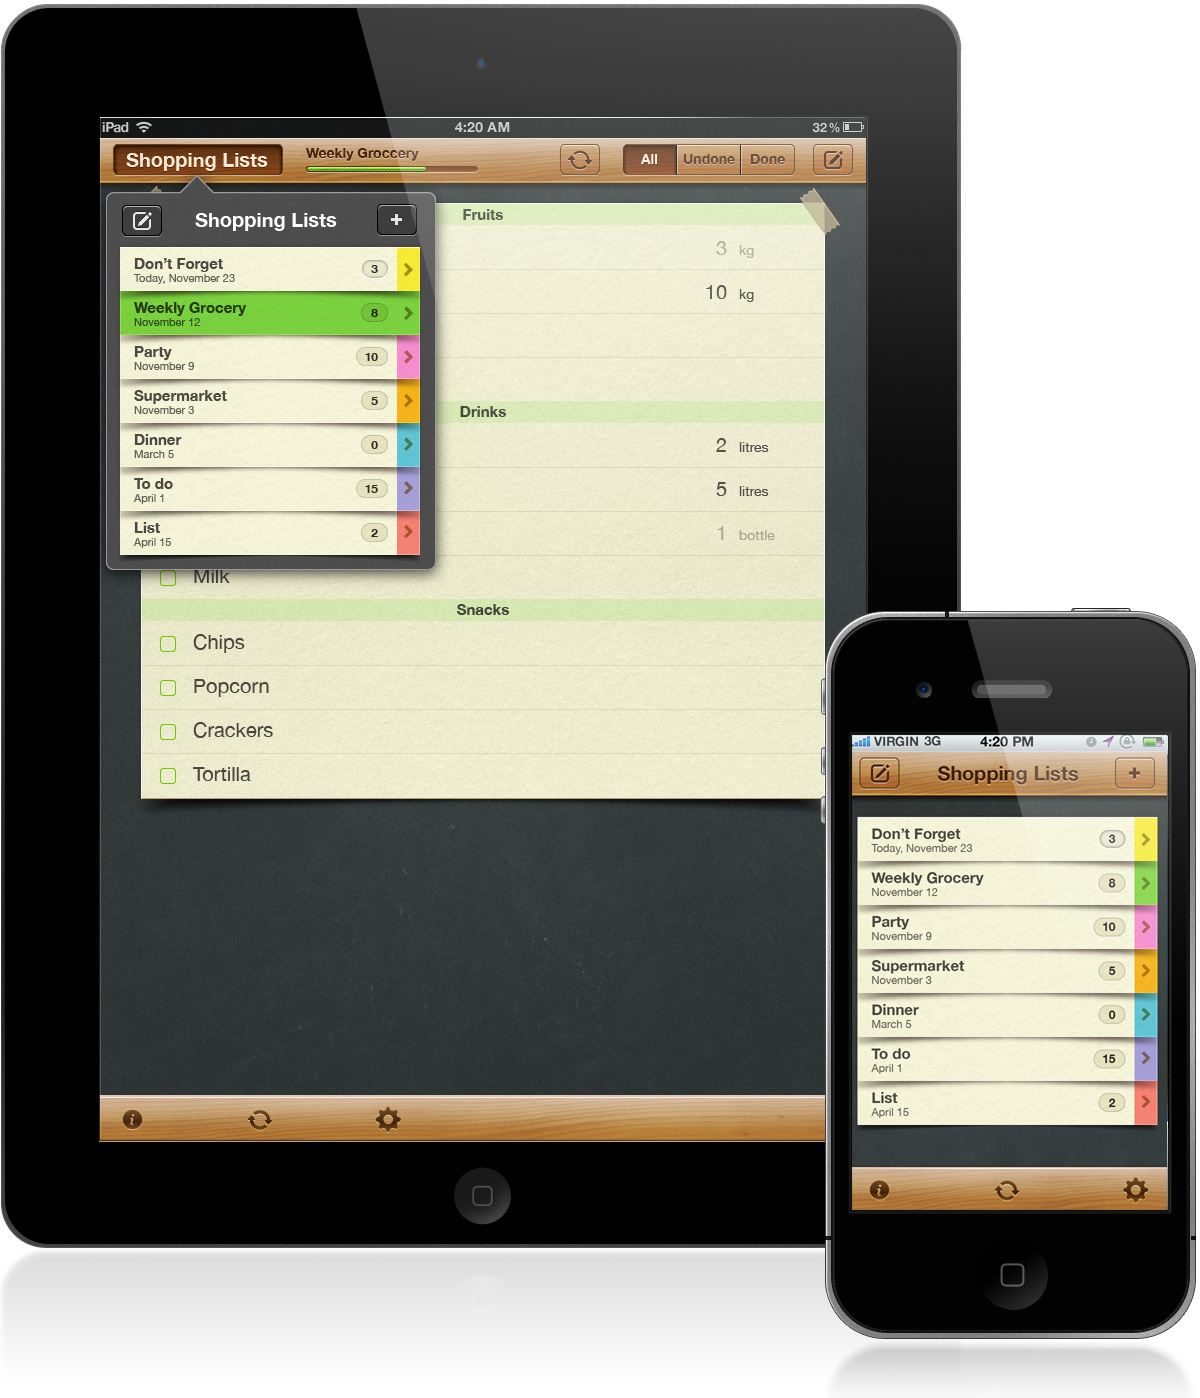 Interfce design for iPhone/iPad App Best Shopping List